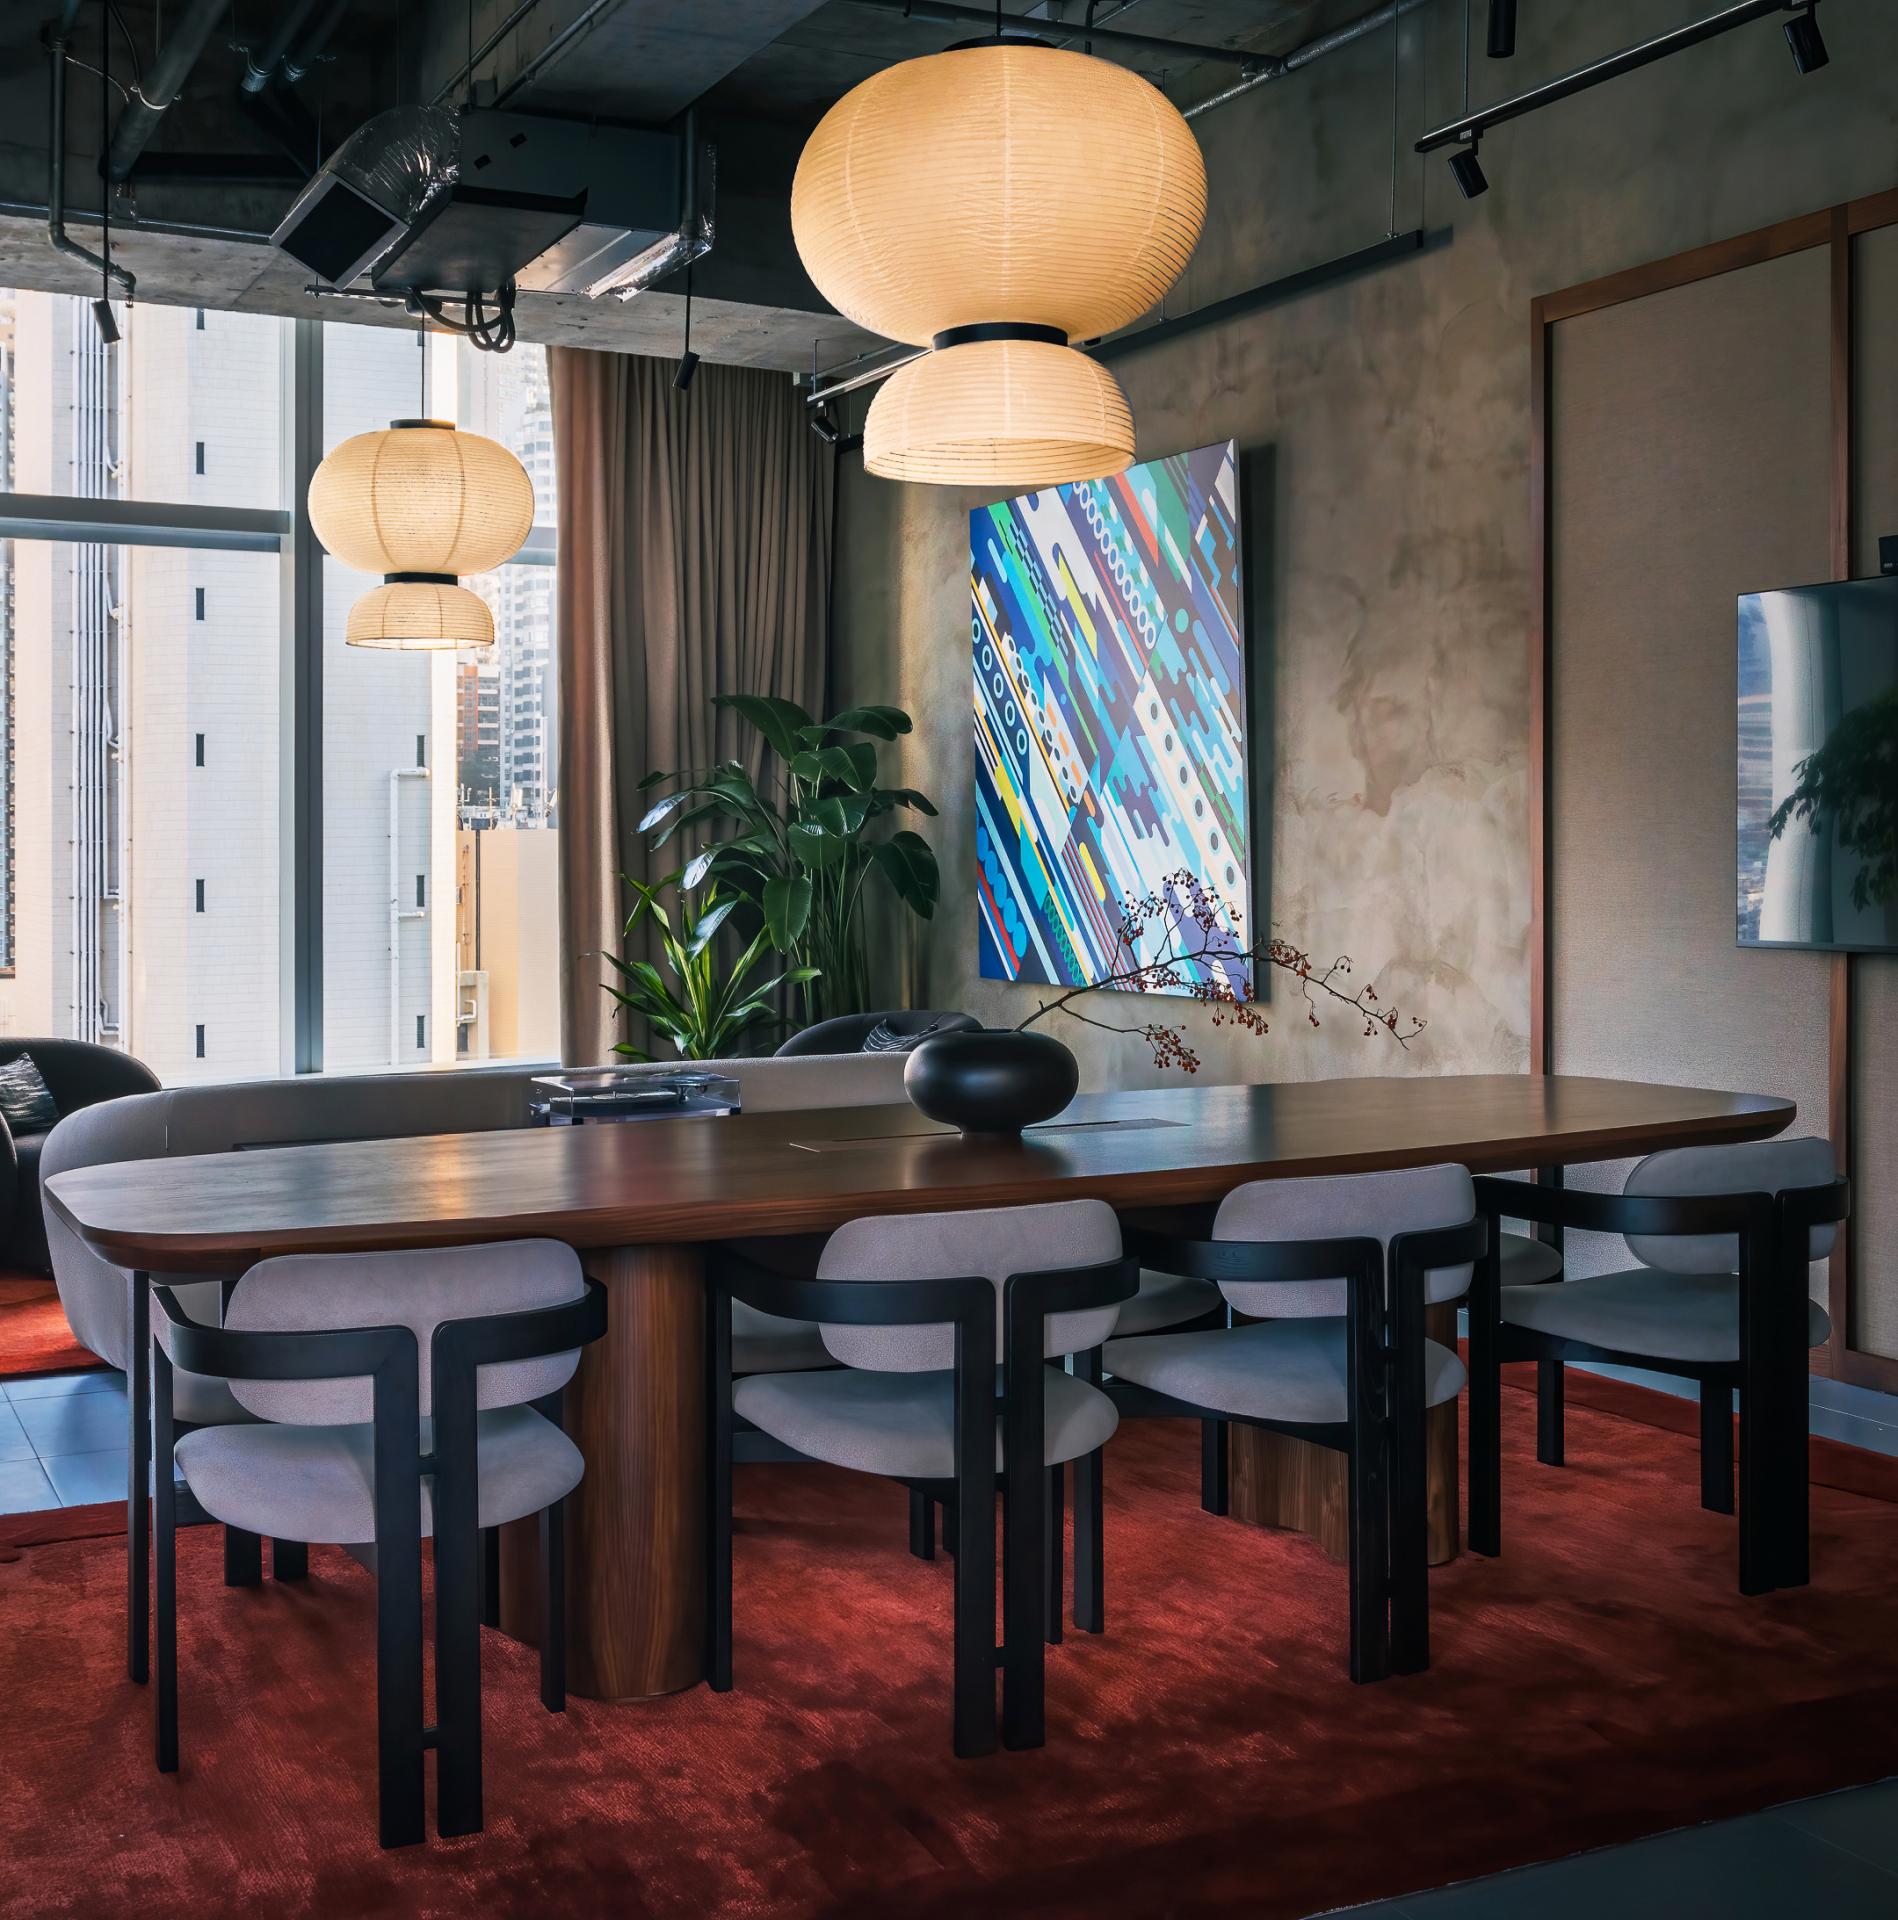 This New 1,100 sq. ft. Office in Sheung Wan Embraces a Korean-Danish Home Vibe